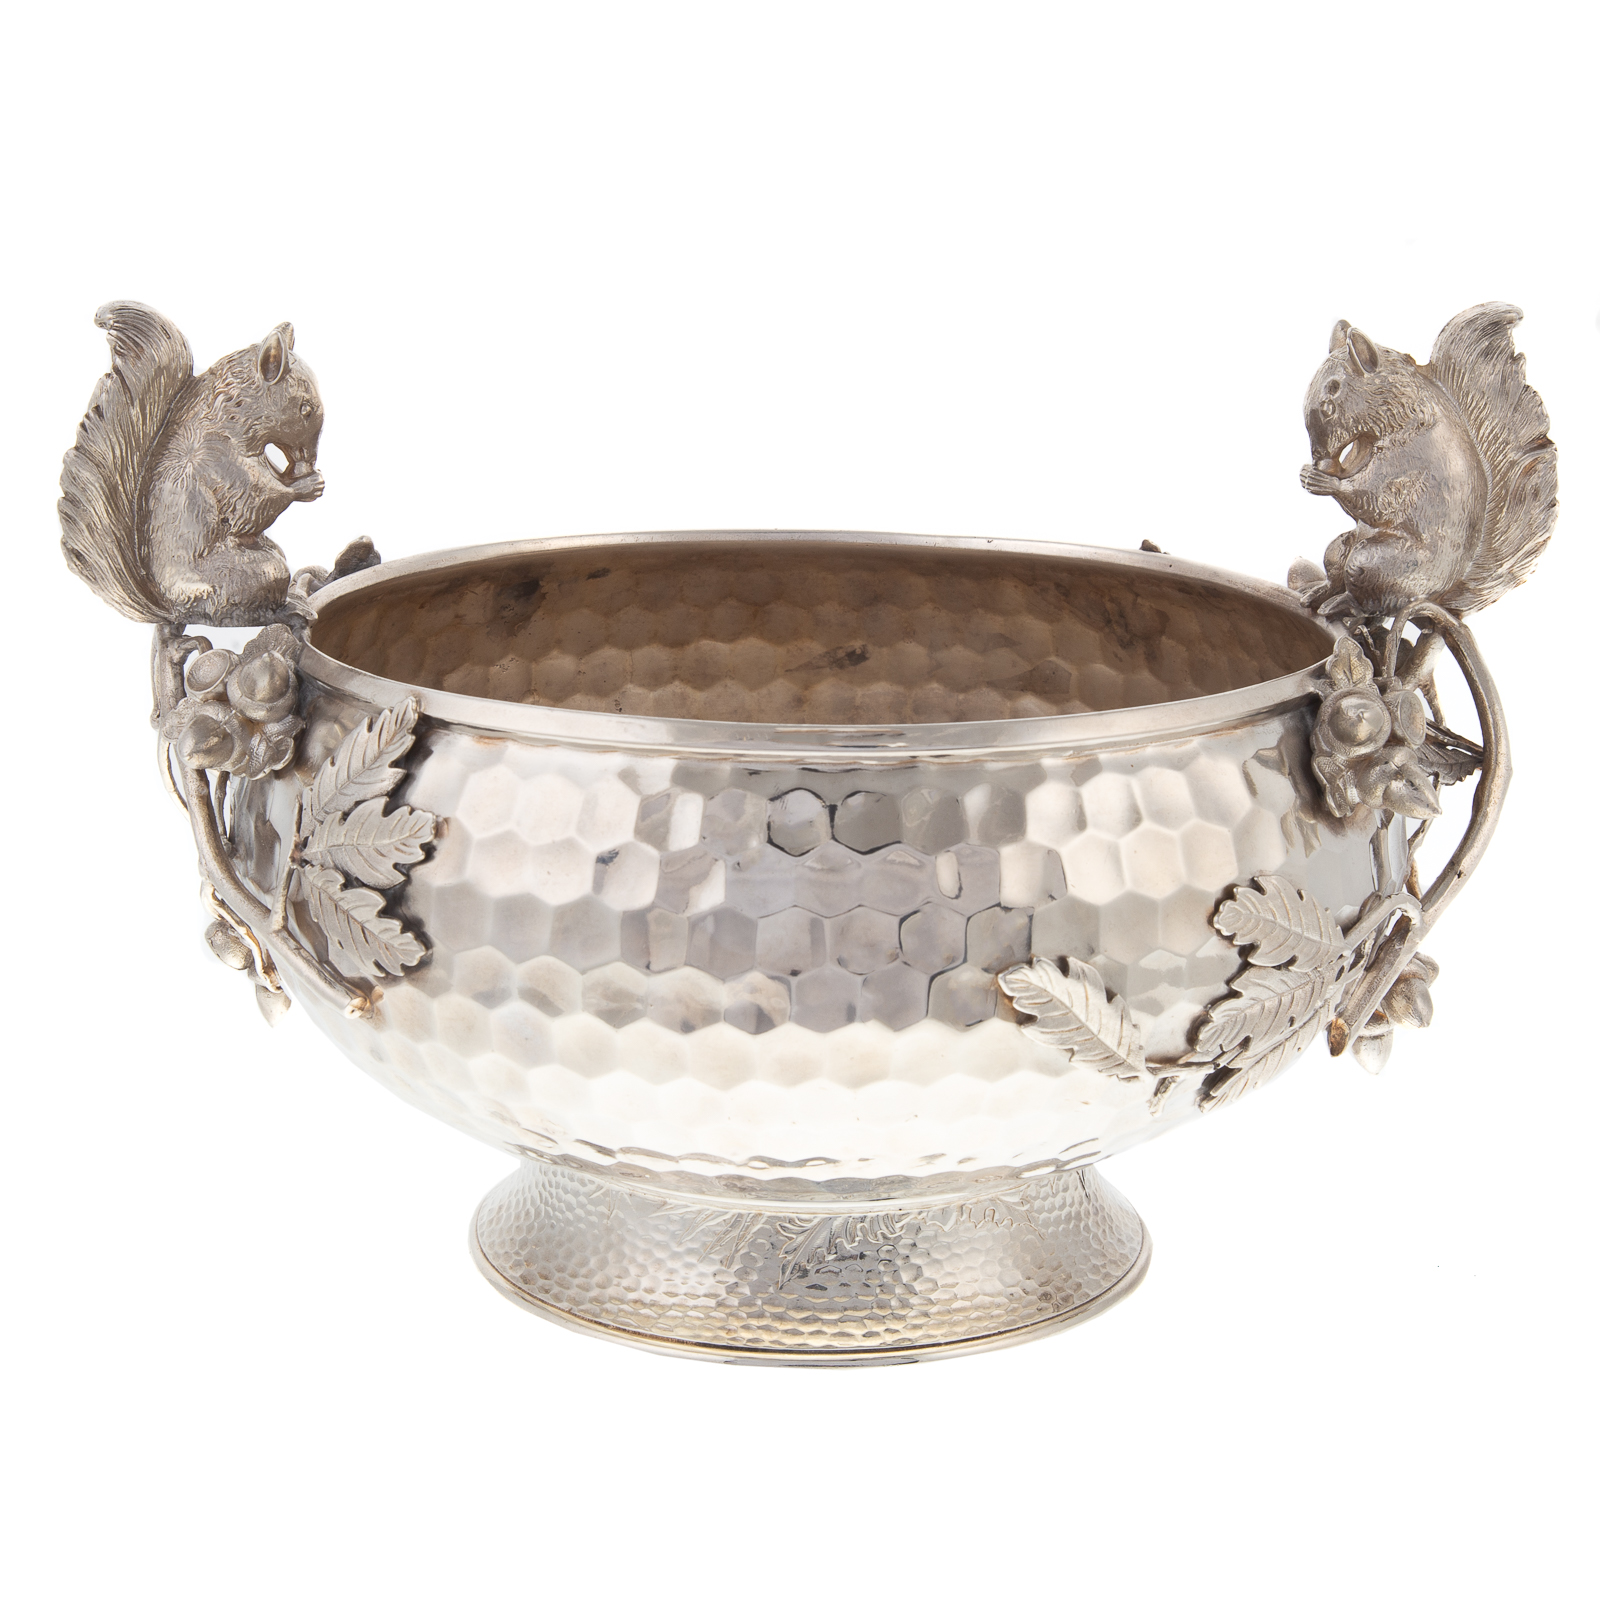 WILCOX SILVER PLATED CENTERBOWL 334091